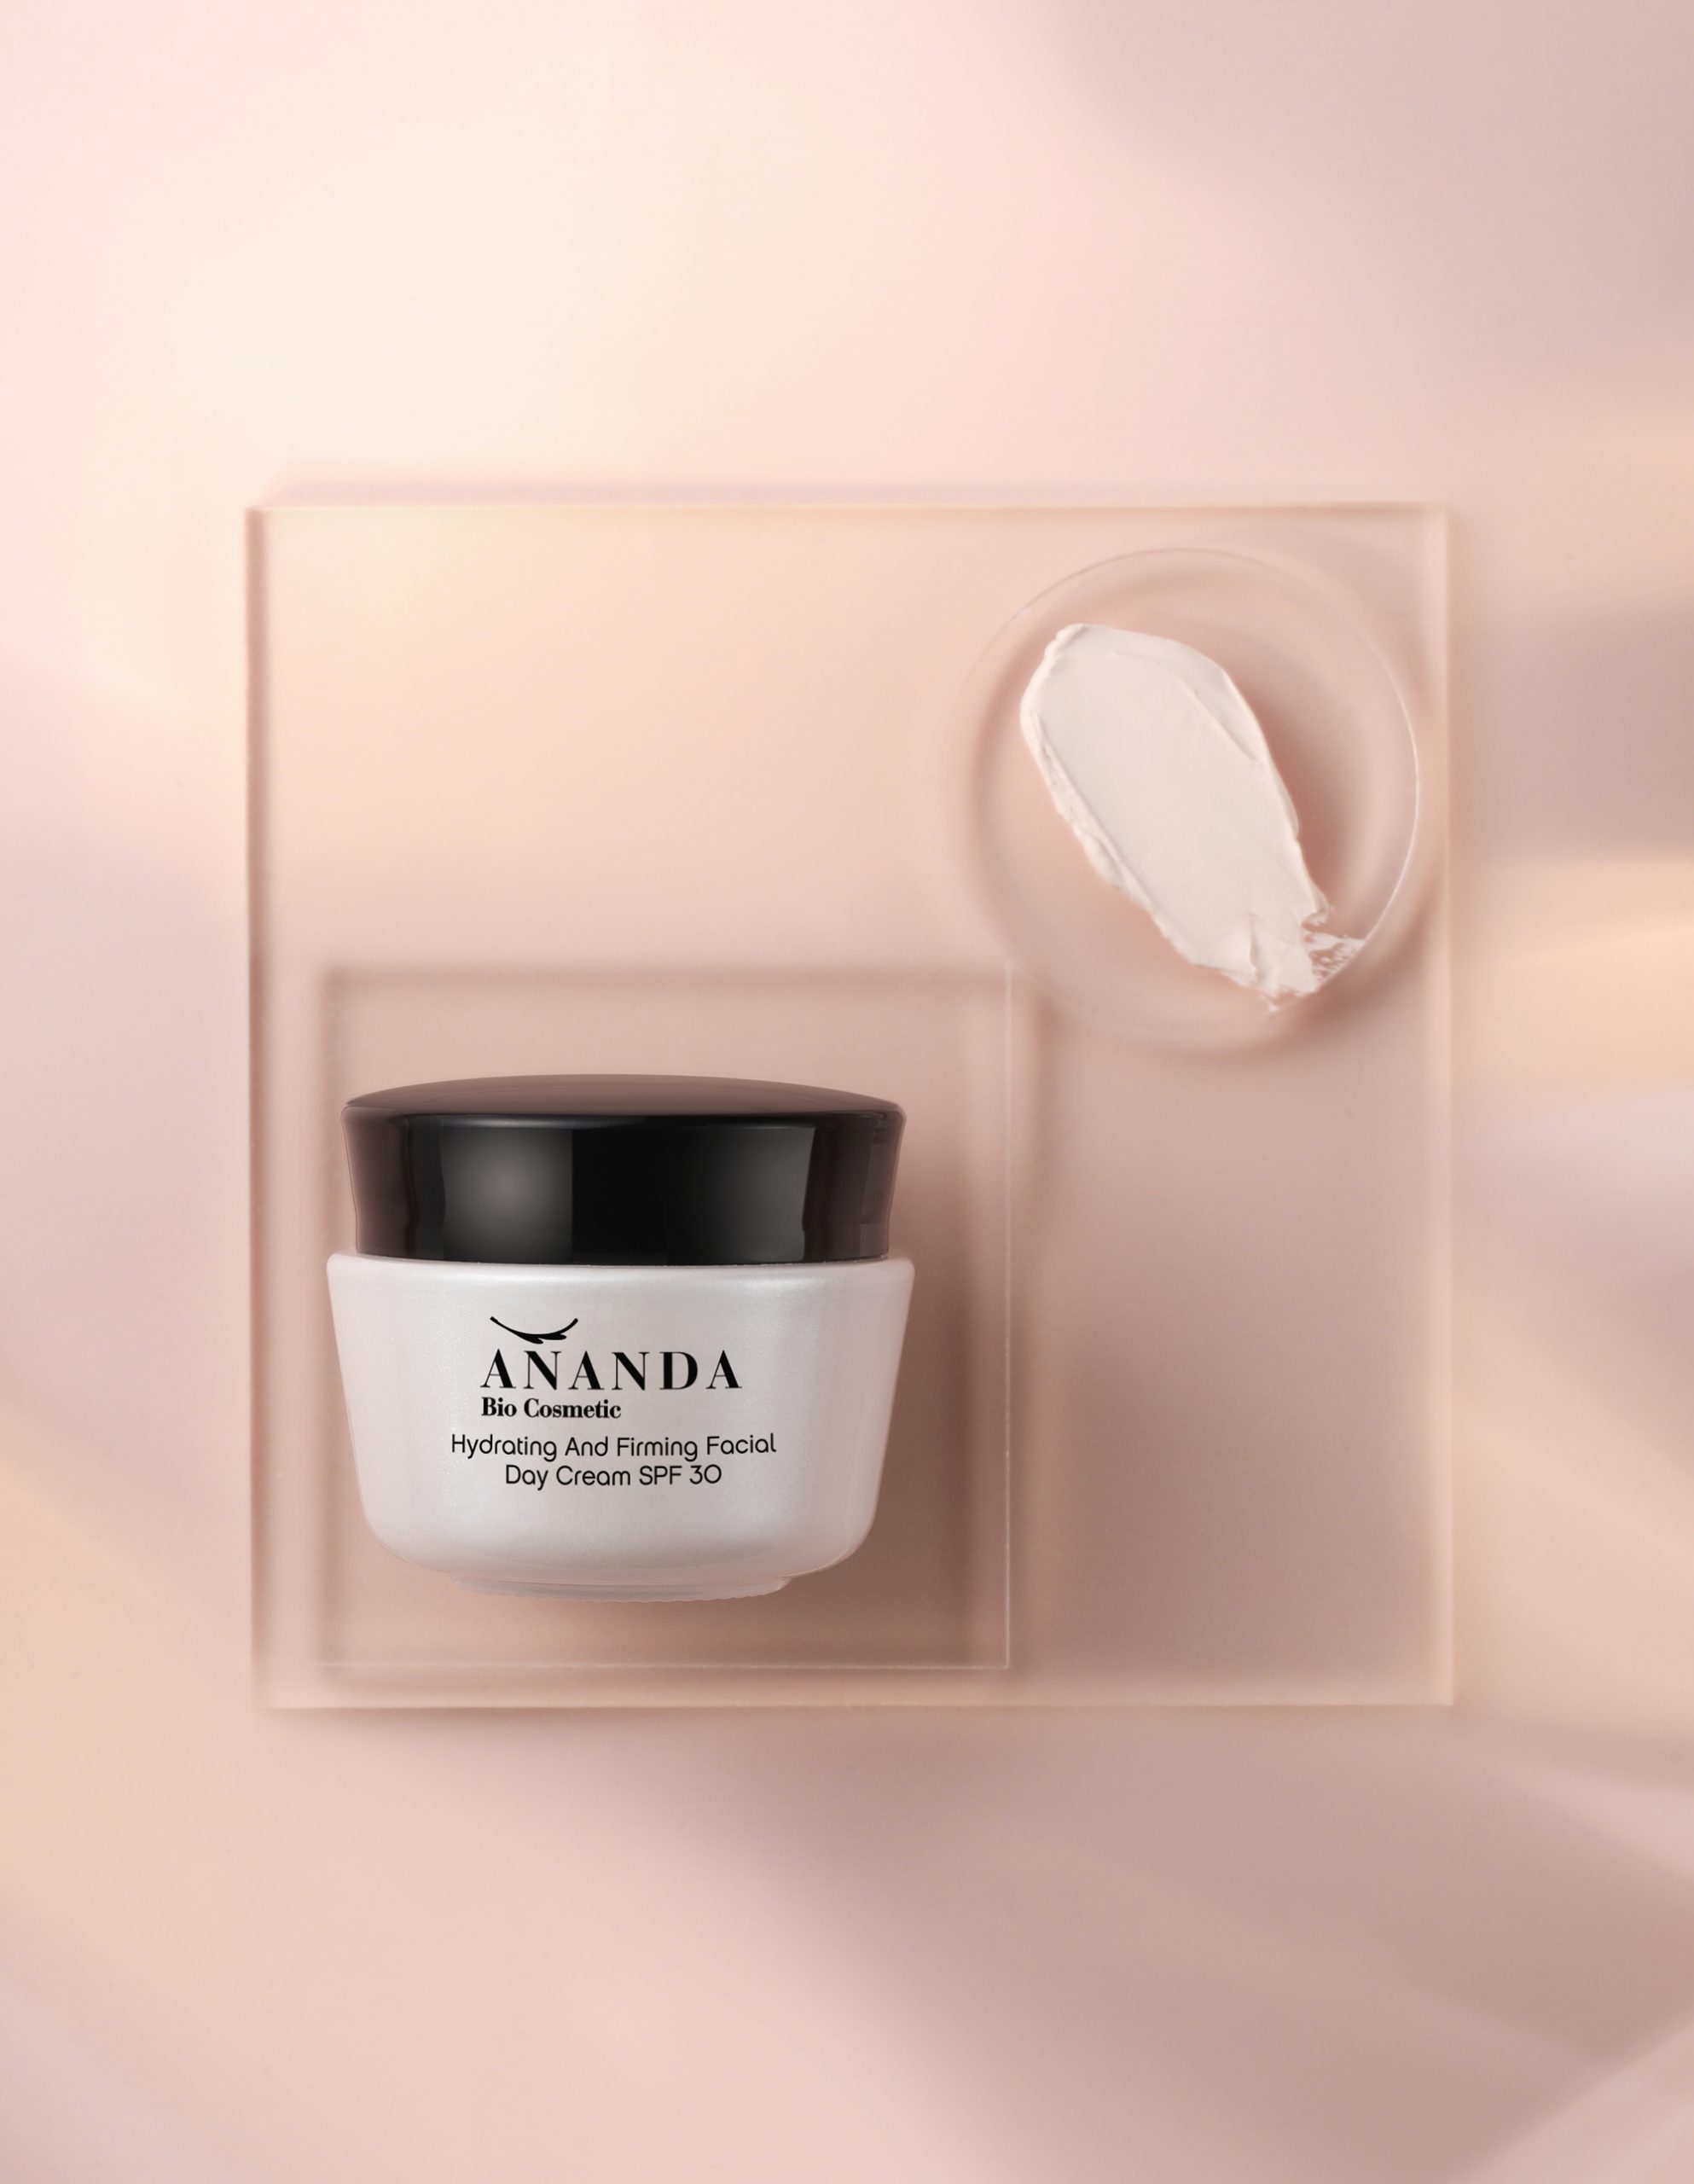 Jar of 'ANANDA Bio Cosmetic Hydrating And Firming Facial Day Cream SPF 30' on a blush-pink backdrop, with a sample smear of the cream on a matching palette above